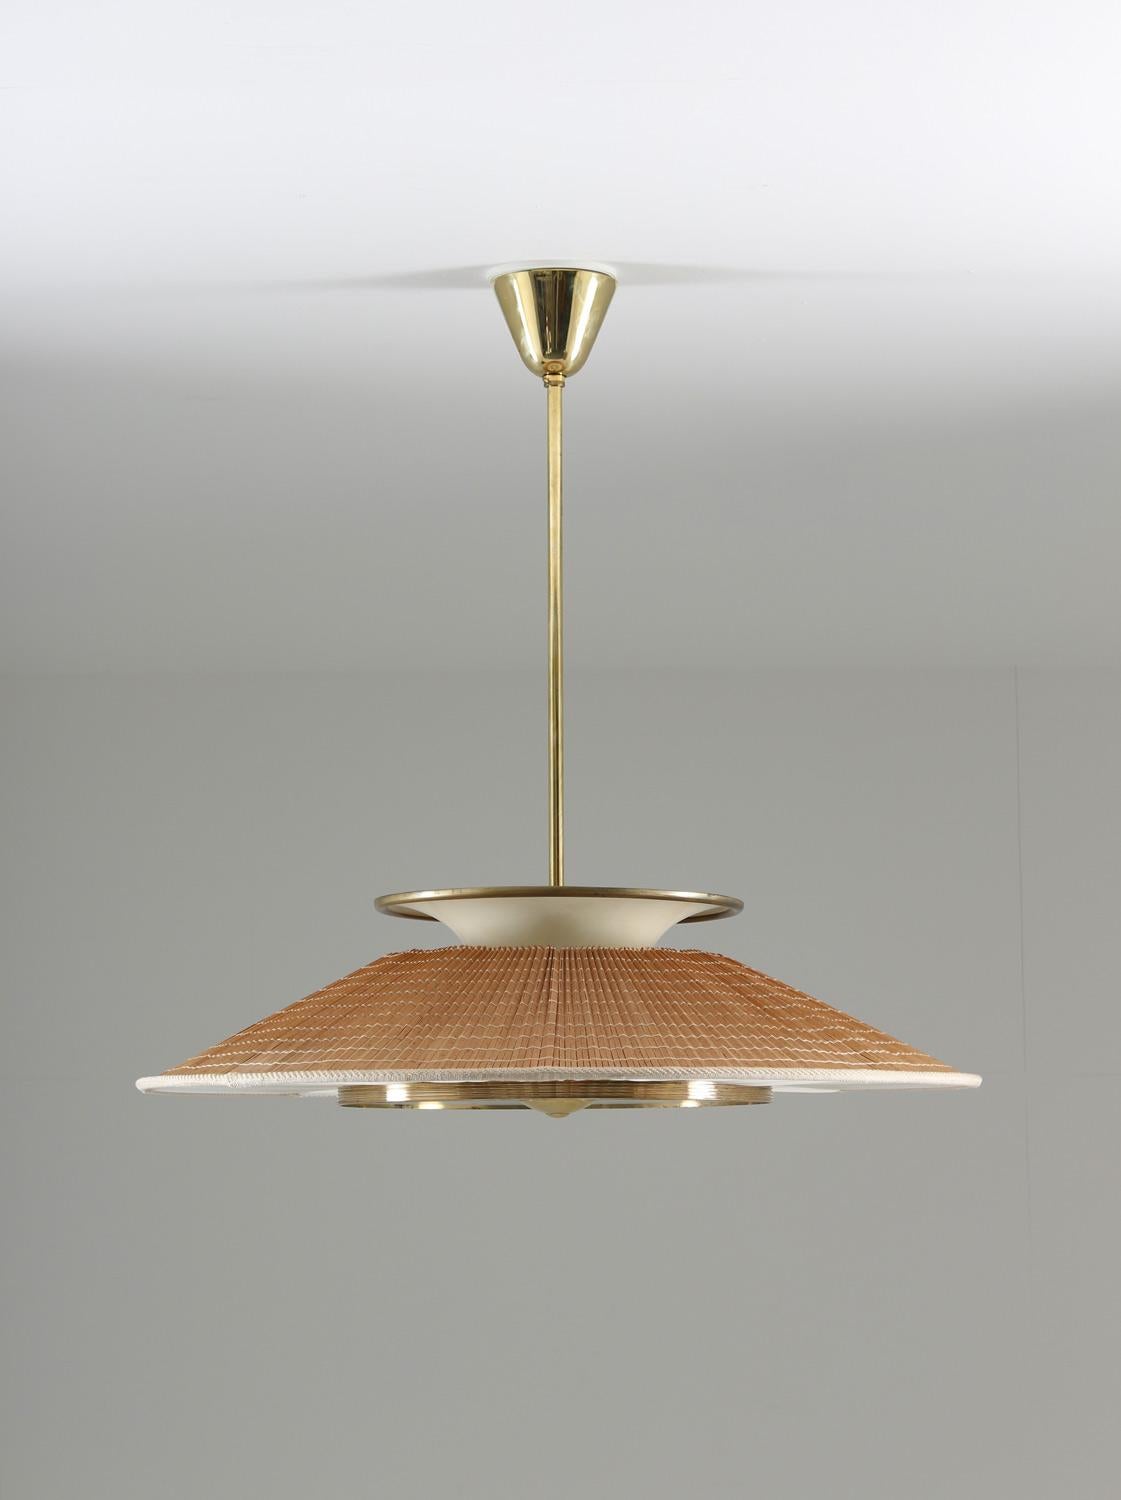 Rare Swedish pendant, possibly manufactured by Böhlmarks, circa 1940.
This large pendant features six light sources; two uplights and four downlights. The bulbs are hidden by a frosted glass diffuser surrounded by white fabric. The hood is made of